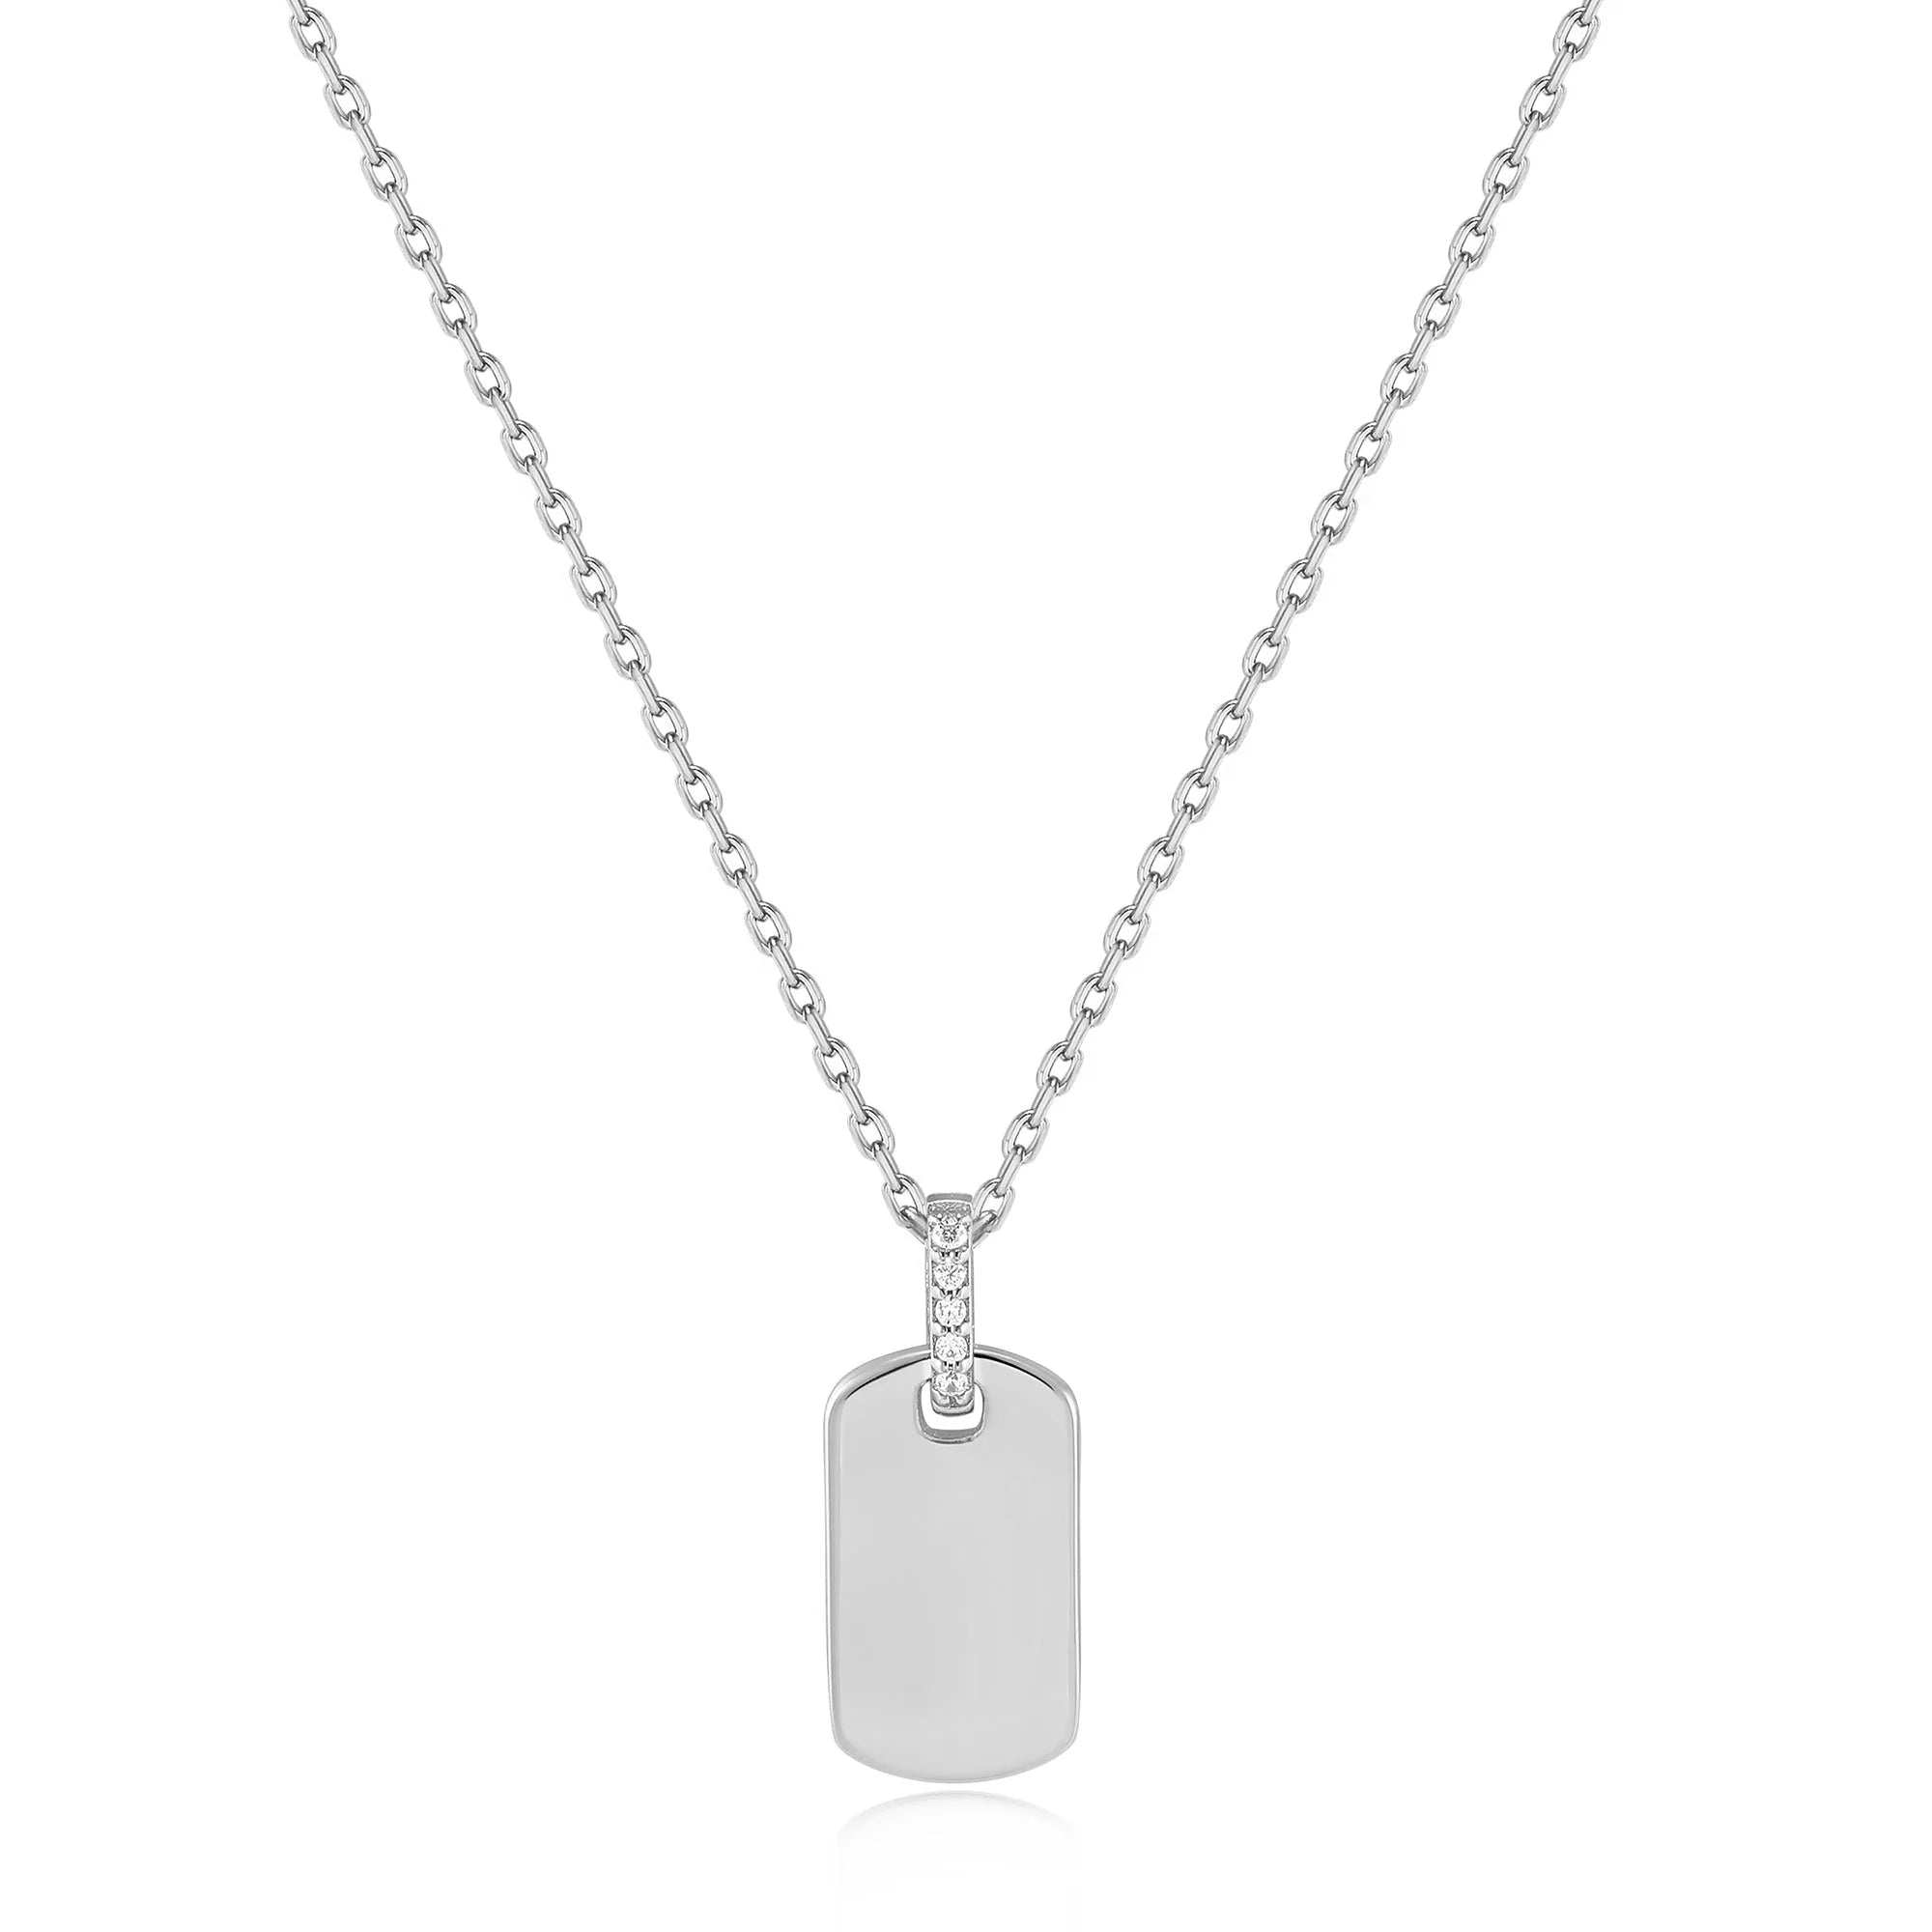 Ania Haie Glam Tag Pendant Necklaces